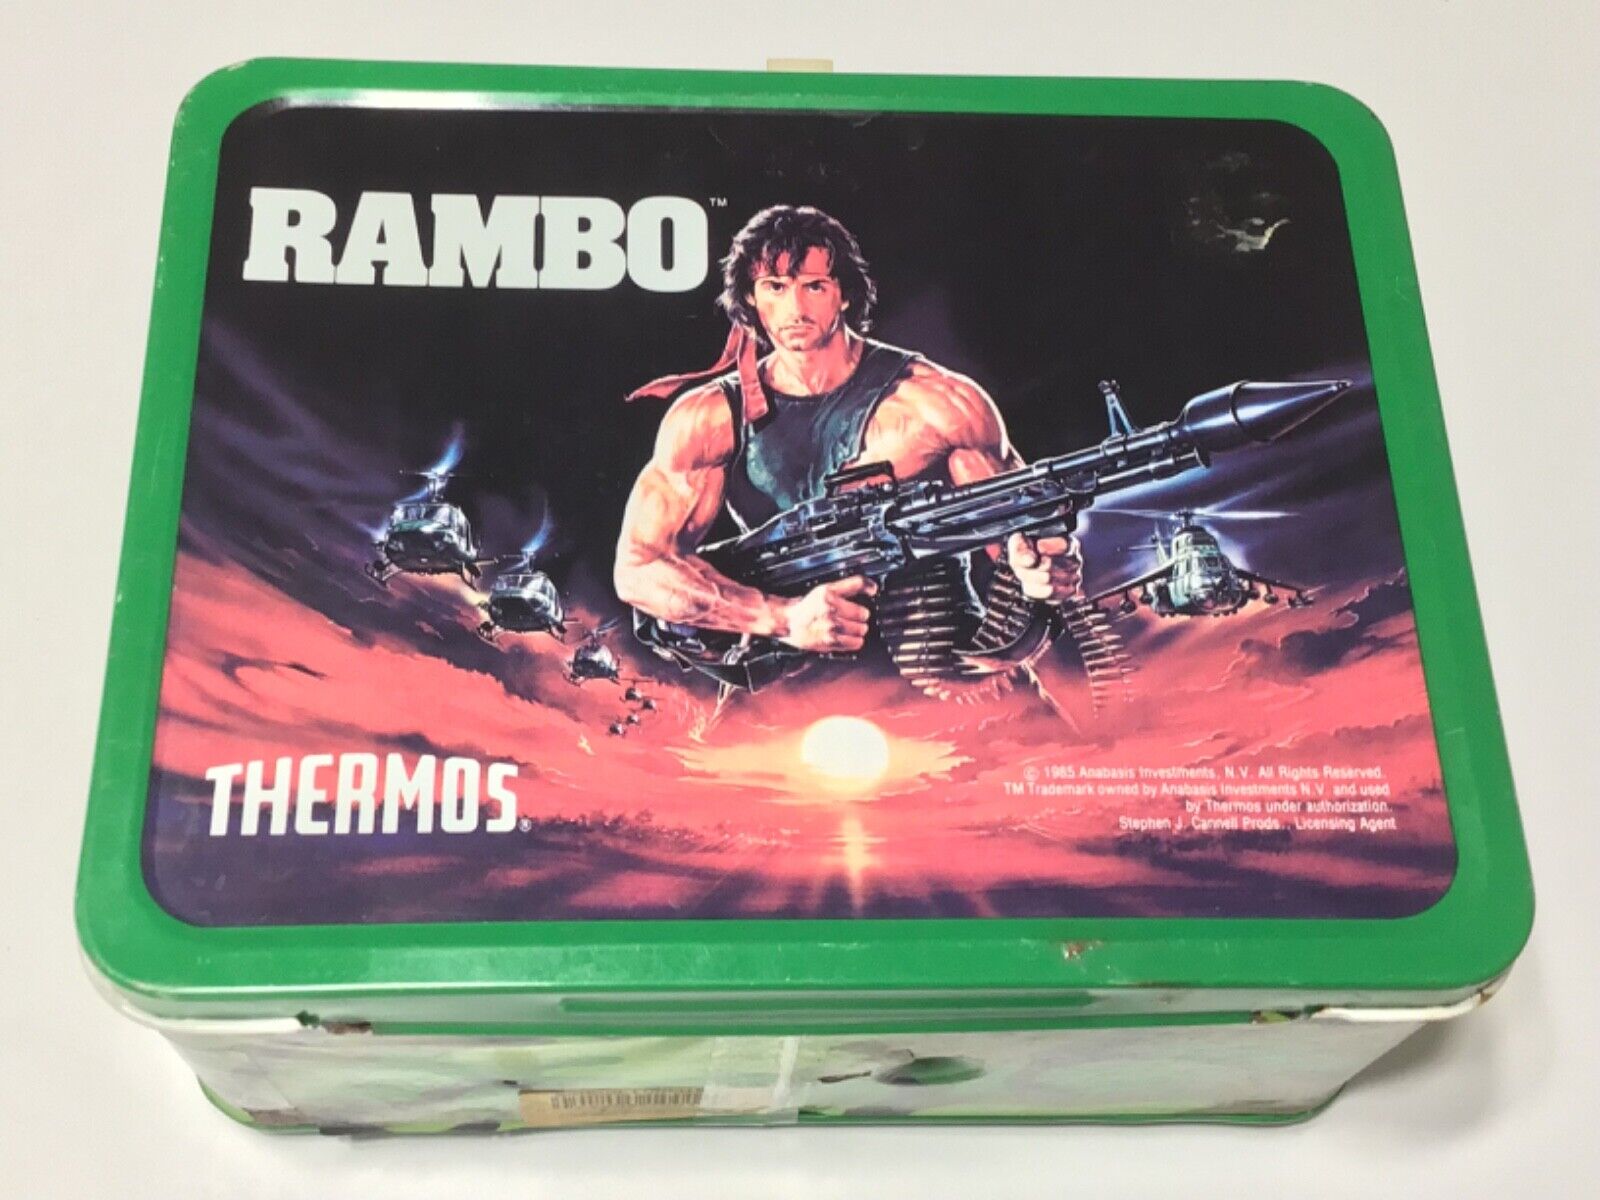 Vintage RAMBO 1985 VINTAGE METAL LUNCH BOX AND THERMOS GREEN SYLVESTER STALLONE